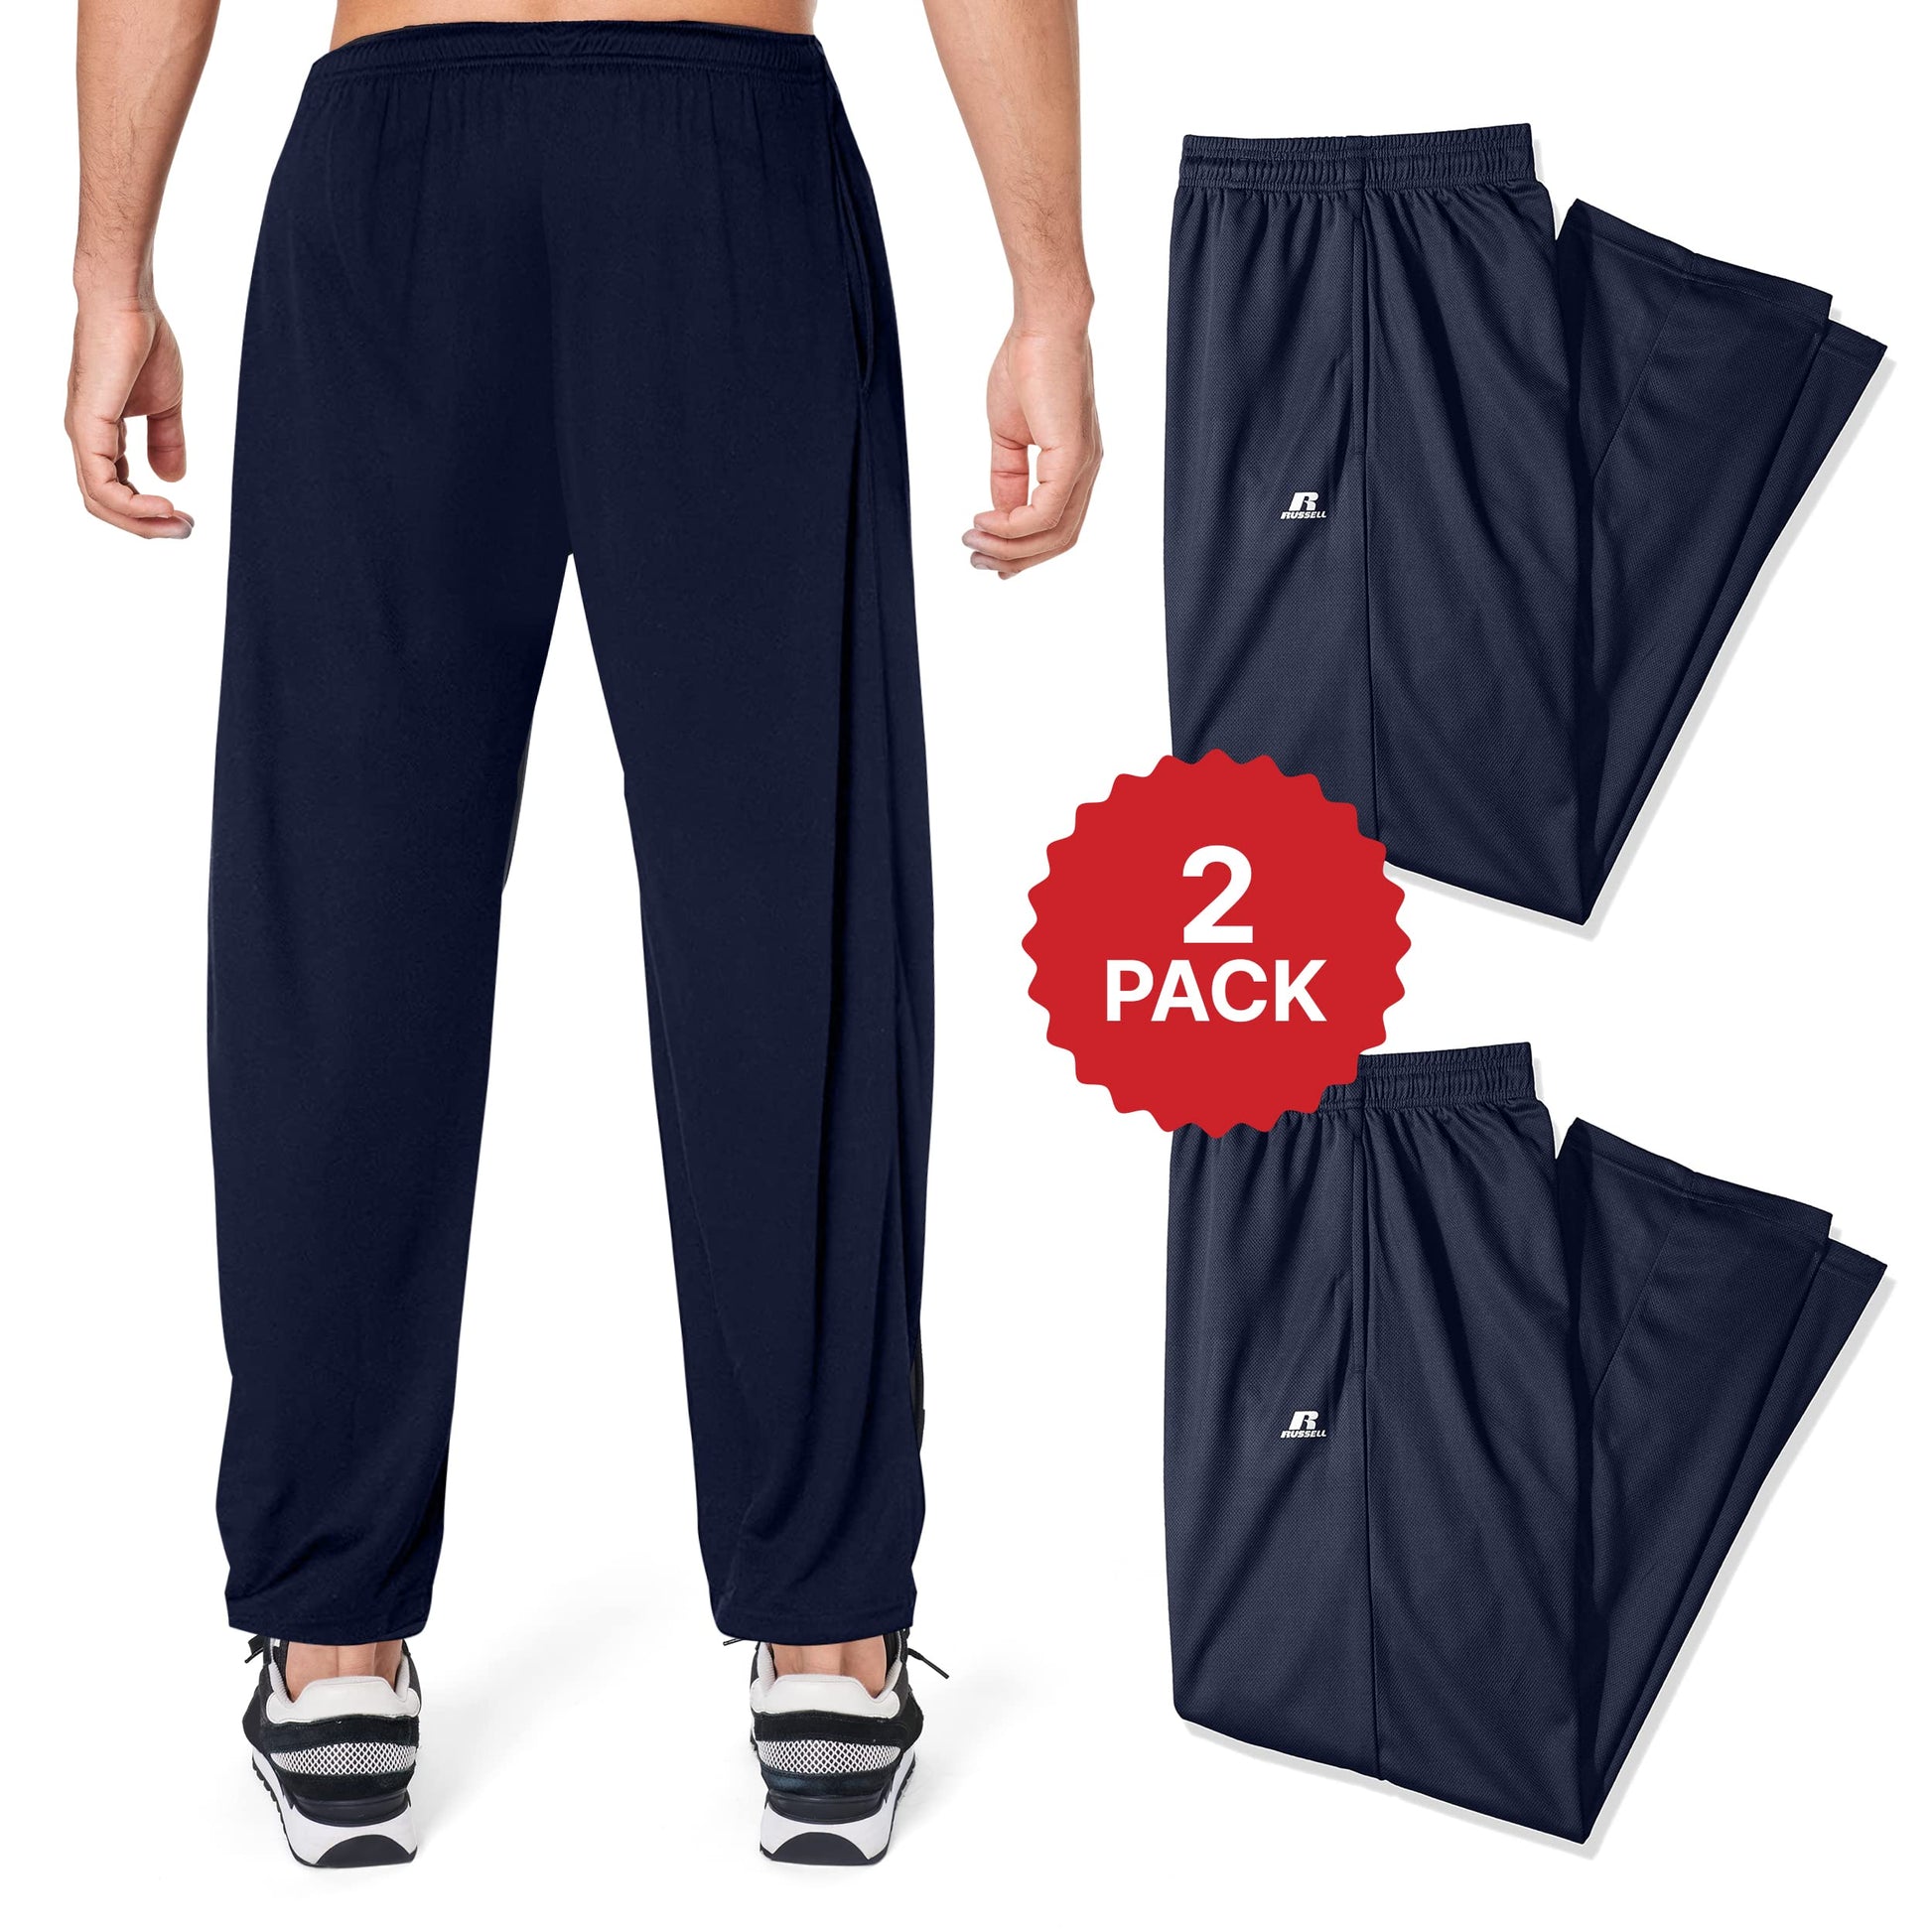 Russell Athletic Pants, Buy Russell Athletic Pants